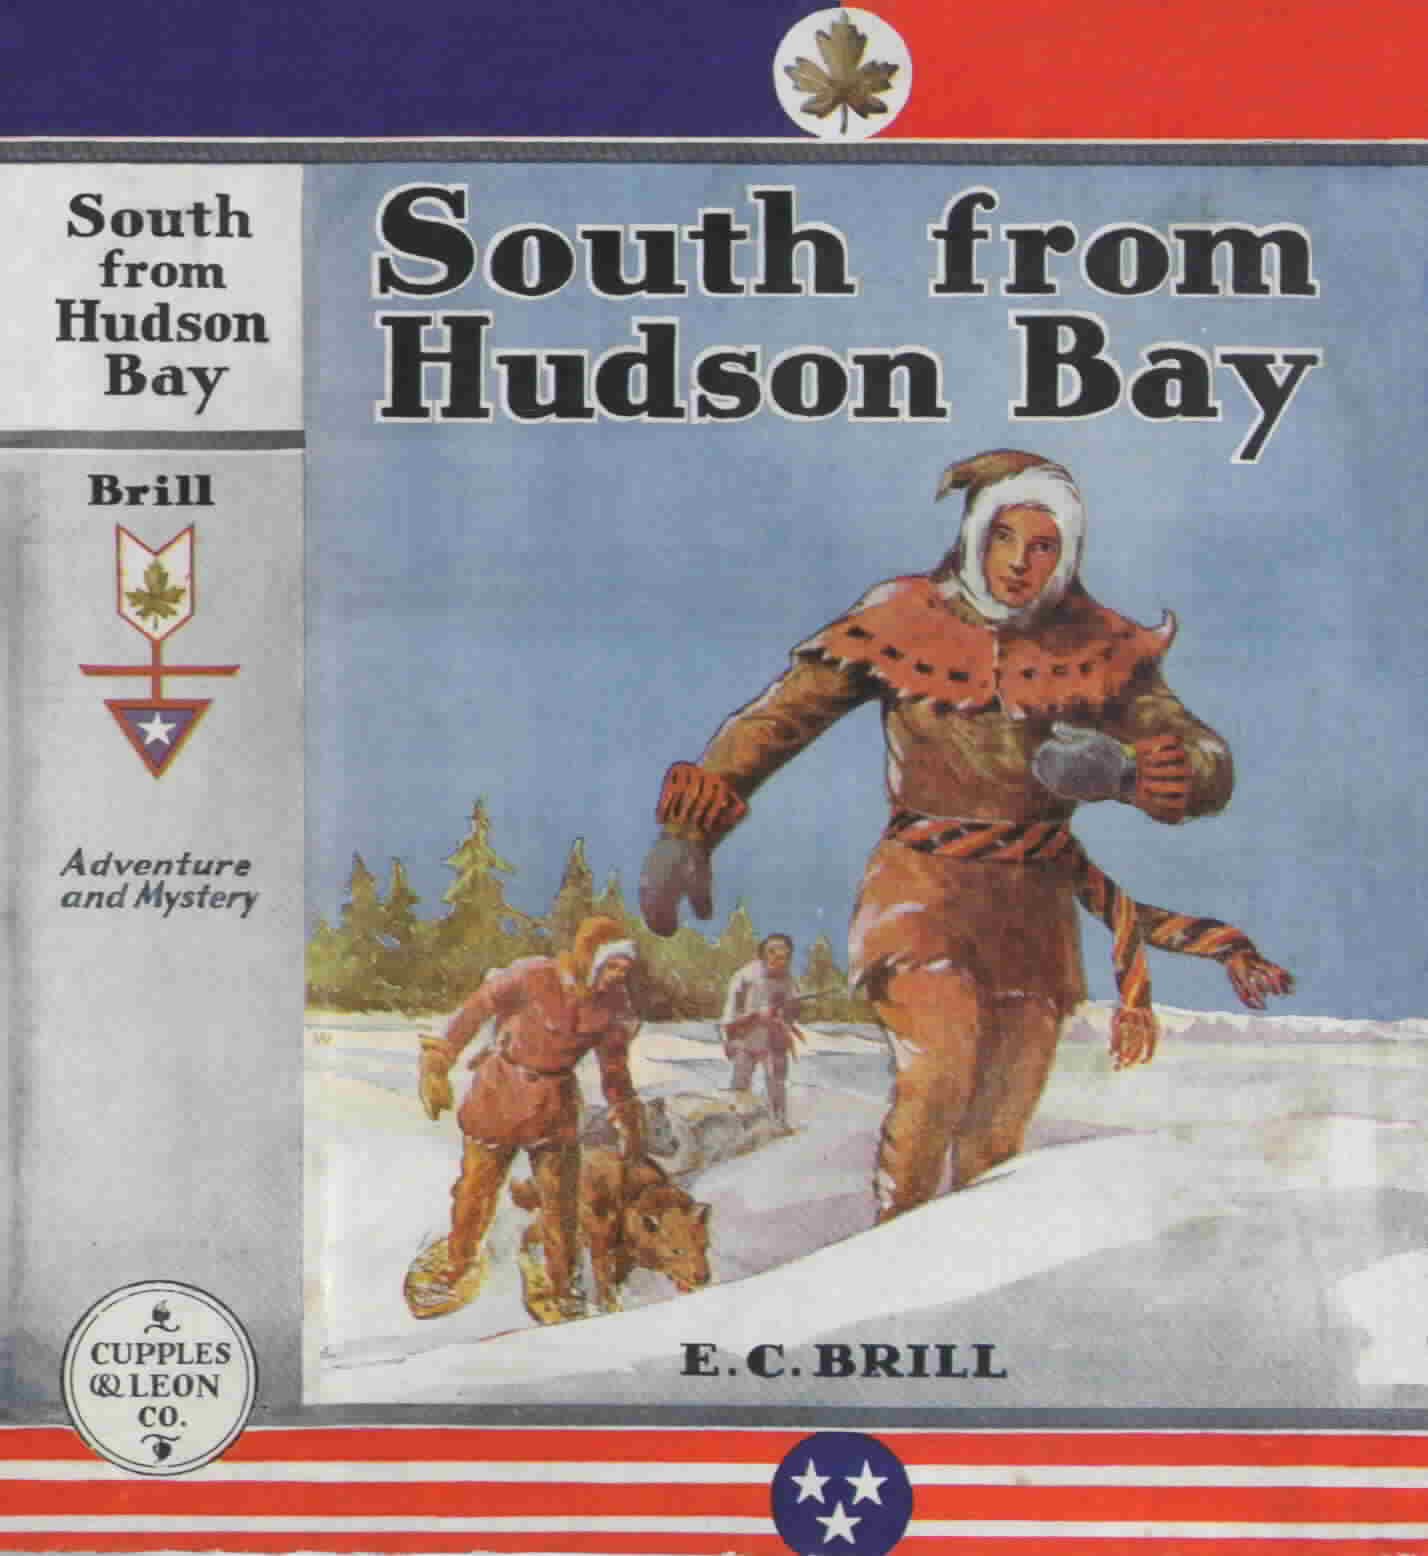 'South from Hudson Bay' by E. C. Brill